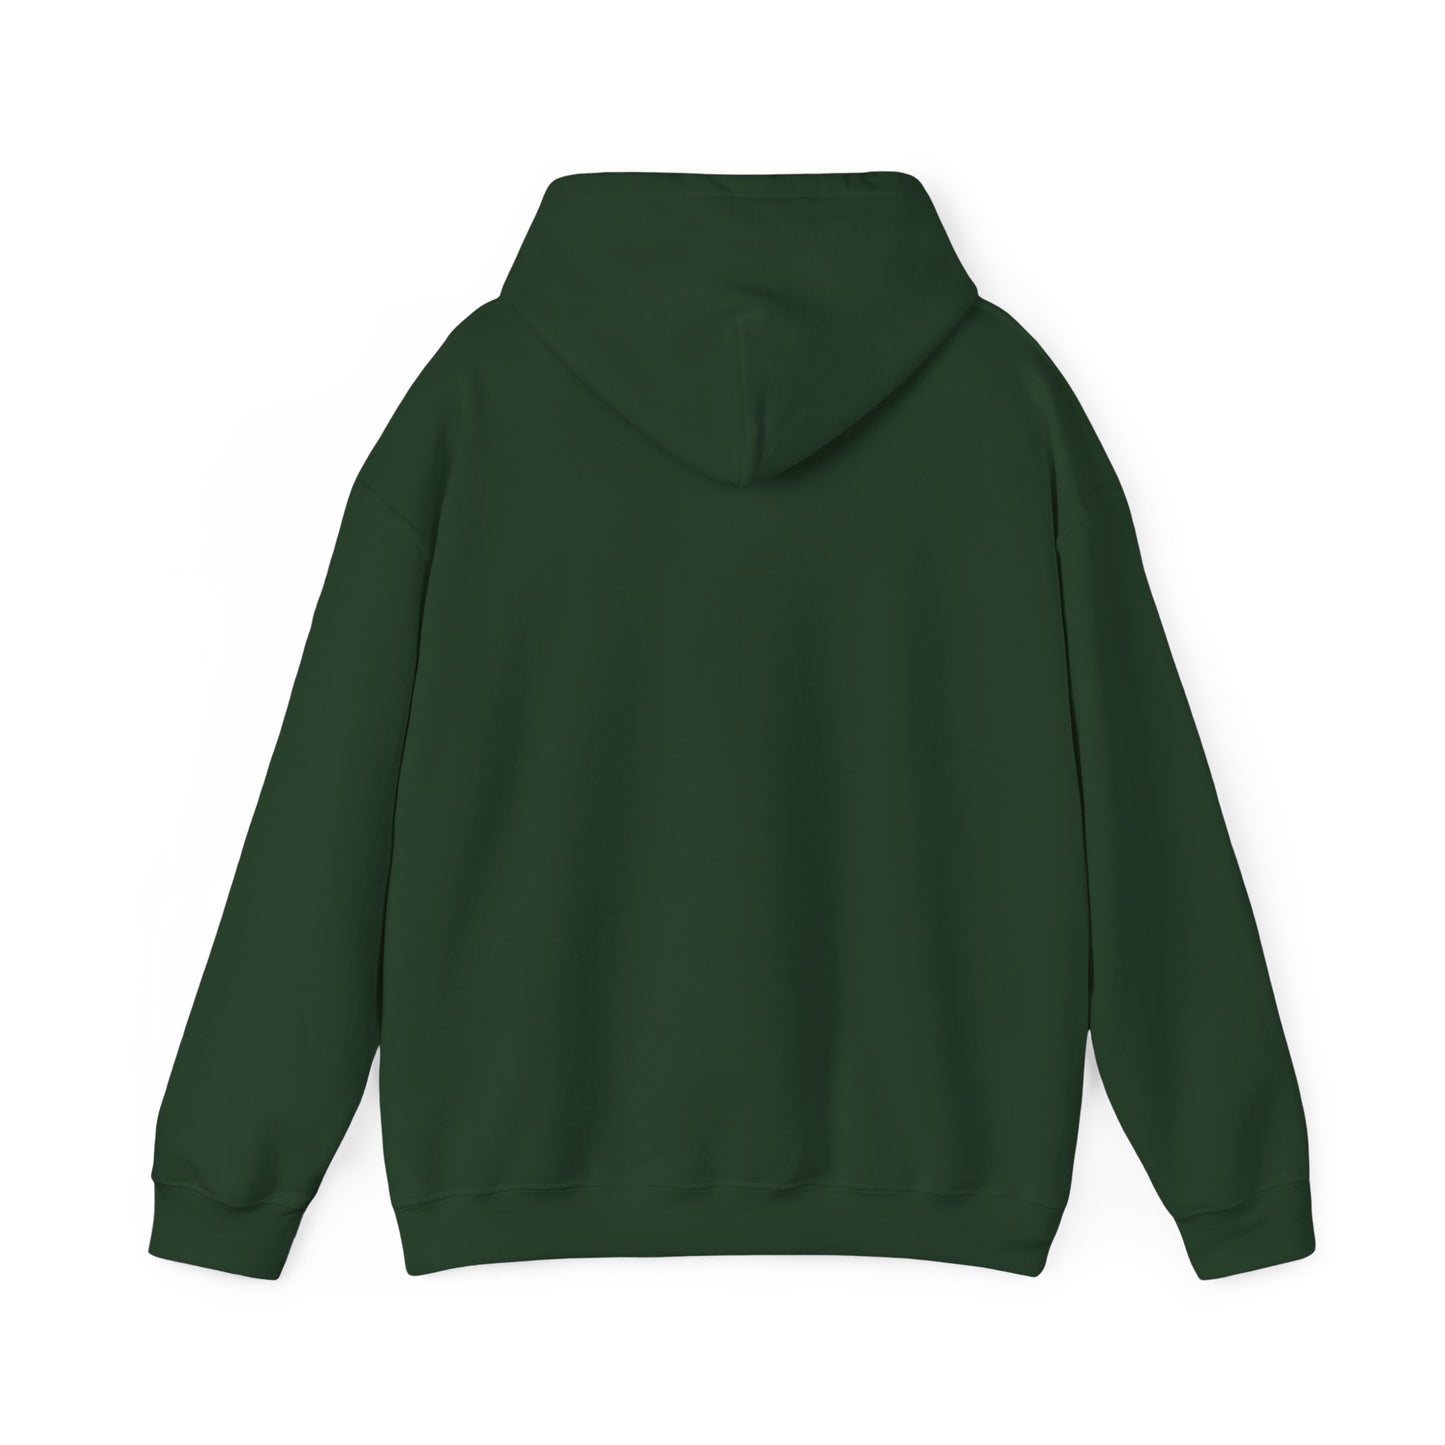 See You Out There Little Flatfender Hooded Sweatshirt